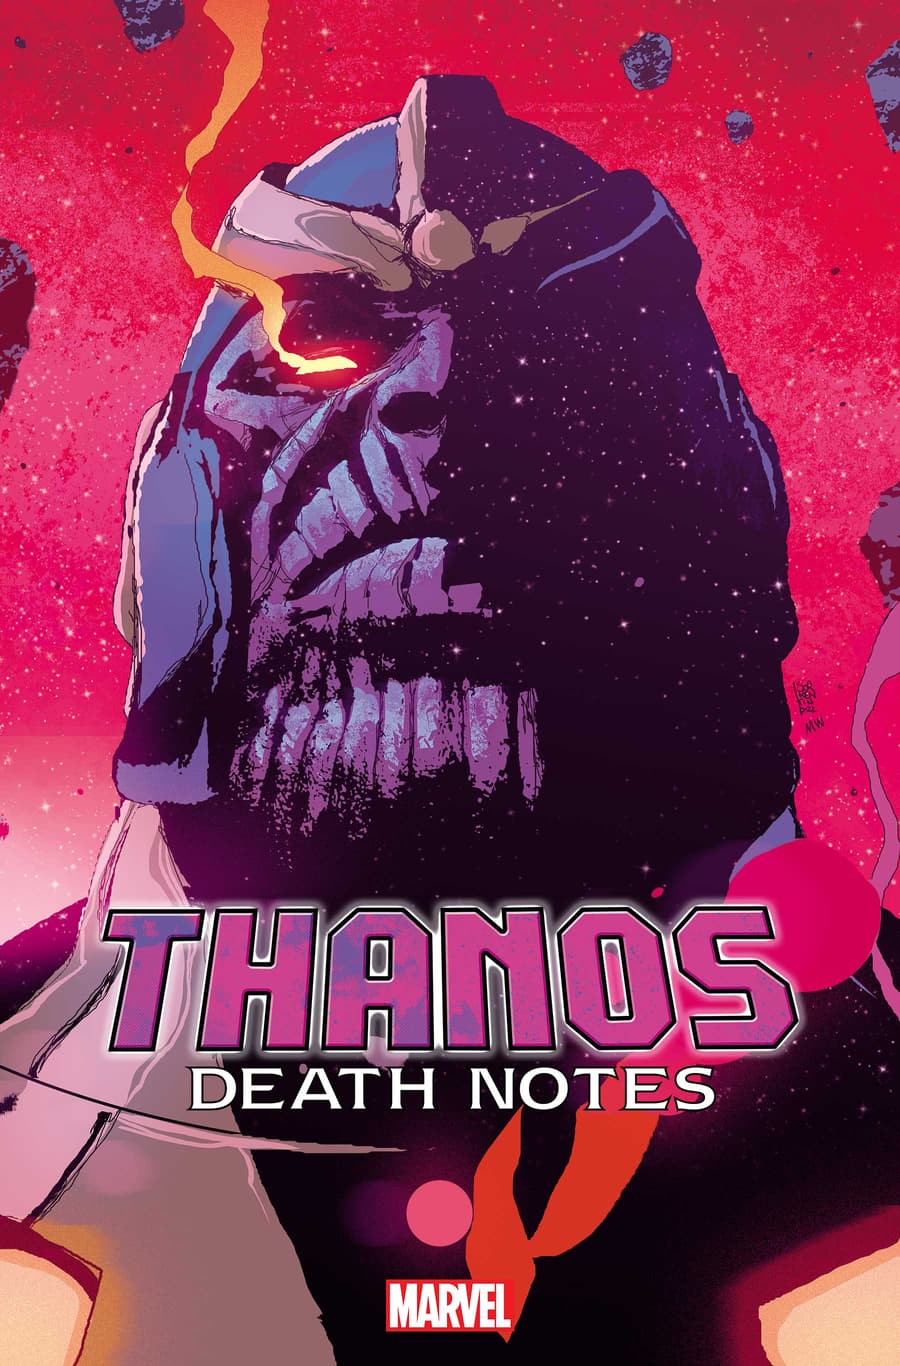 THANOS: DEATH NOTES #1 Cover by ANDREA SORRENTINO